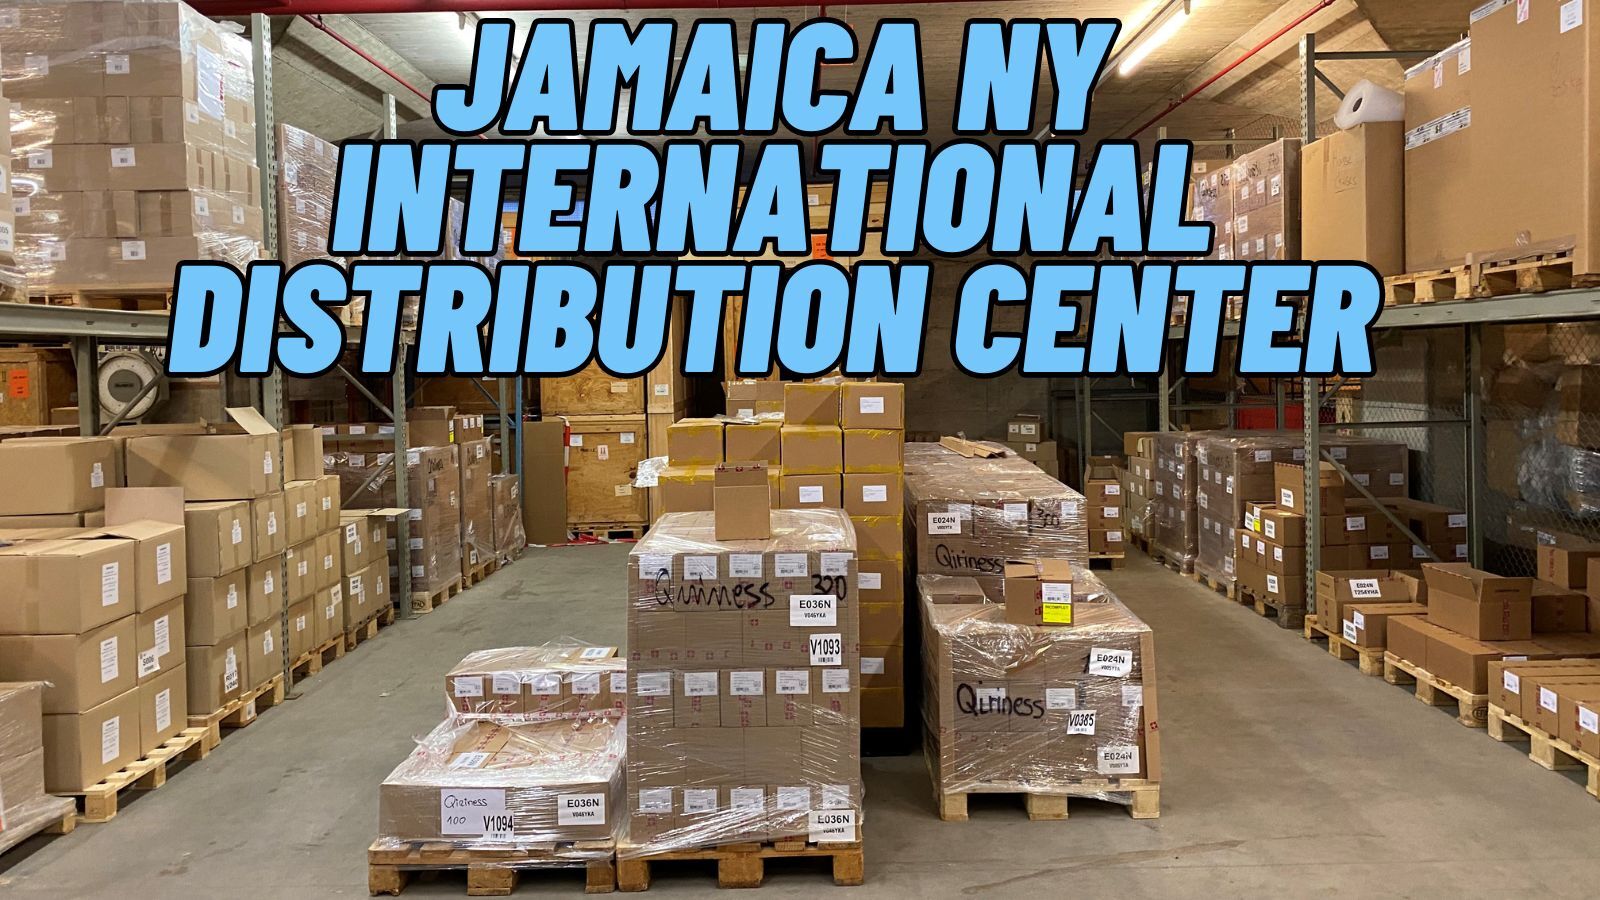 Jamaica NY International Distribution Center (All You Need to Know!）